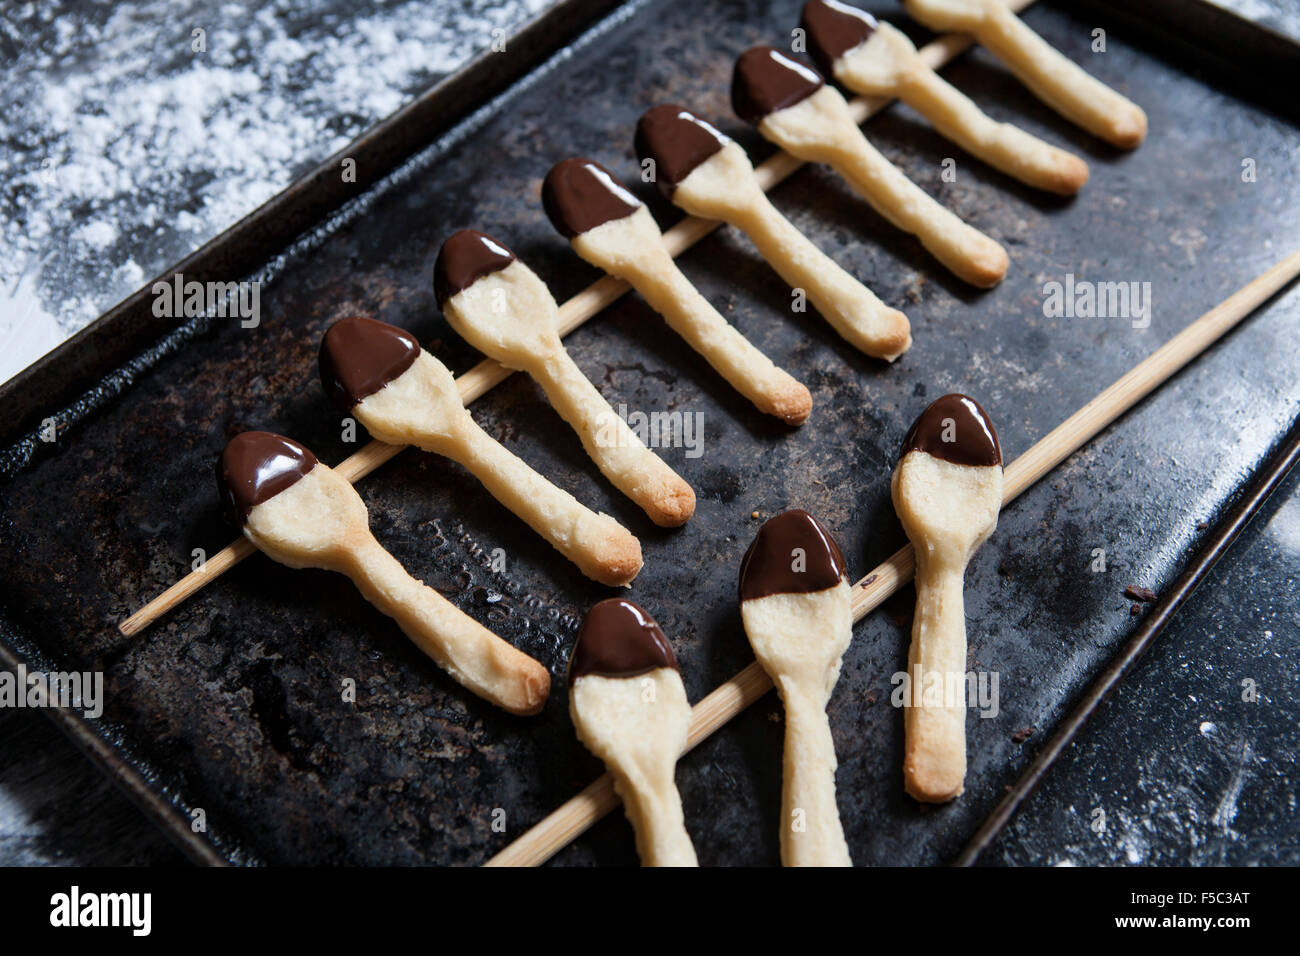 Two Rows of Cookie Spoons Dipped in Chocolate Stock Photo